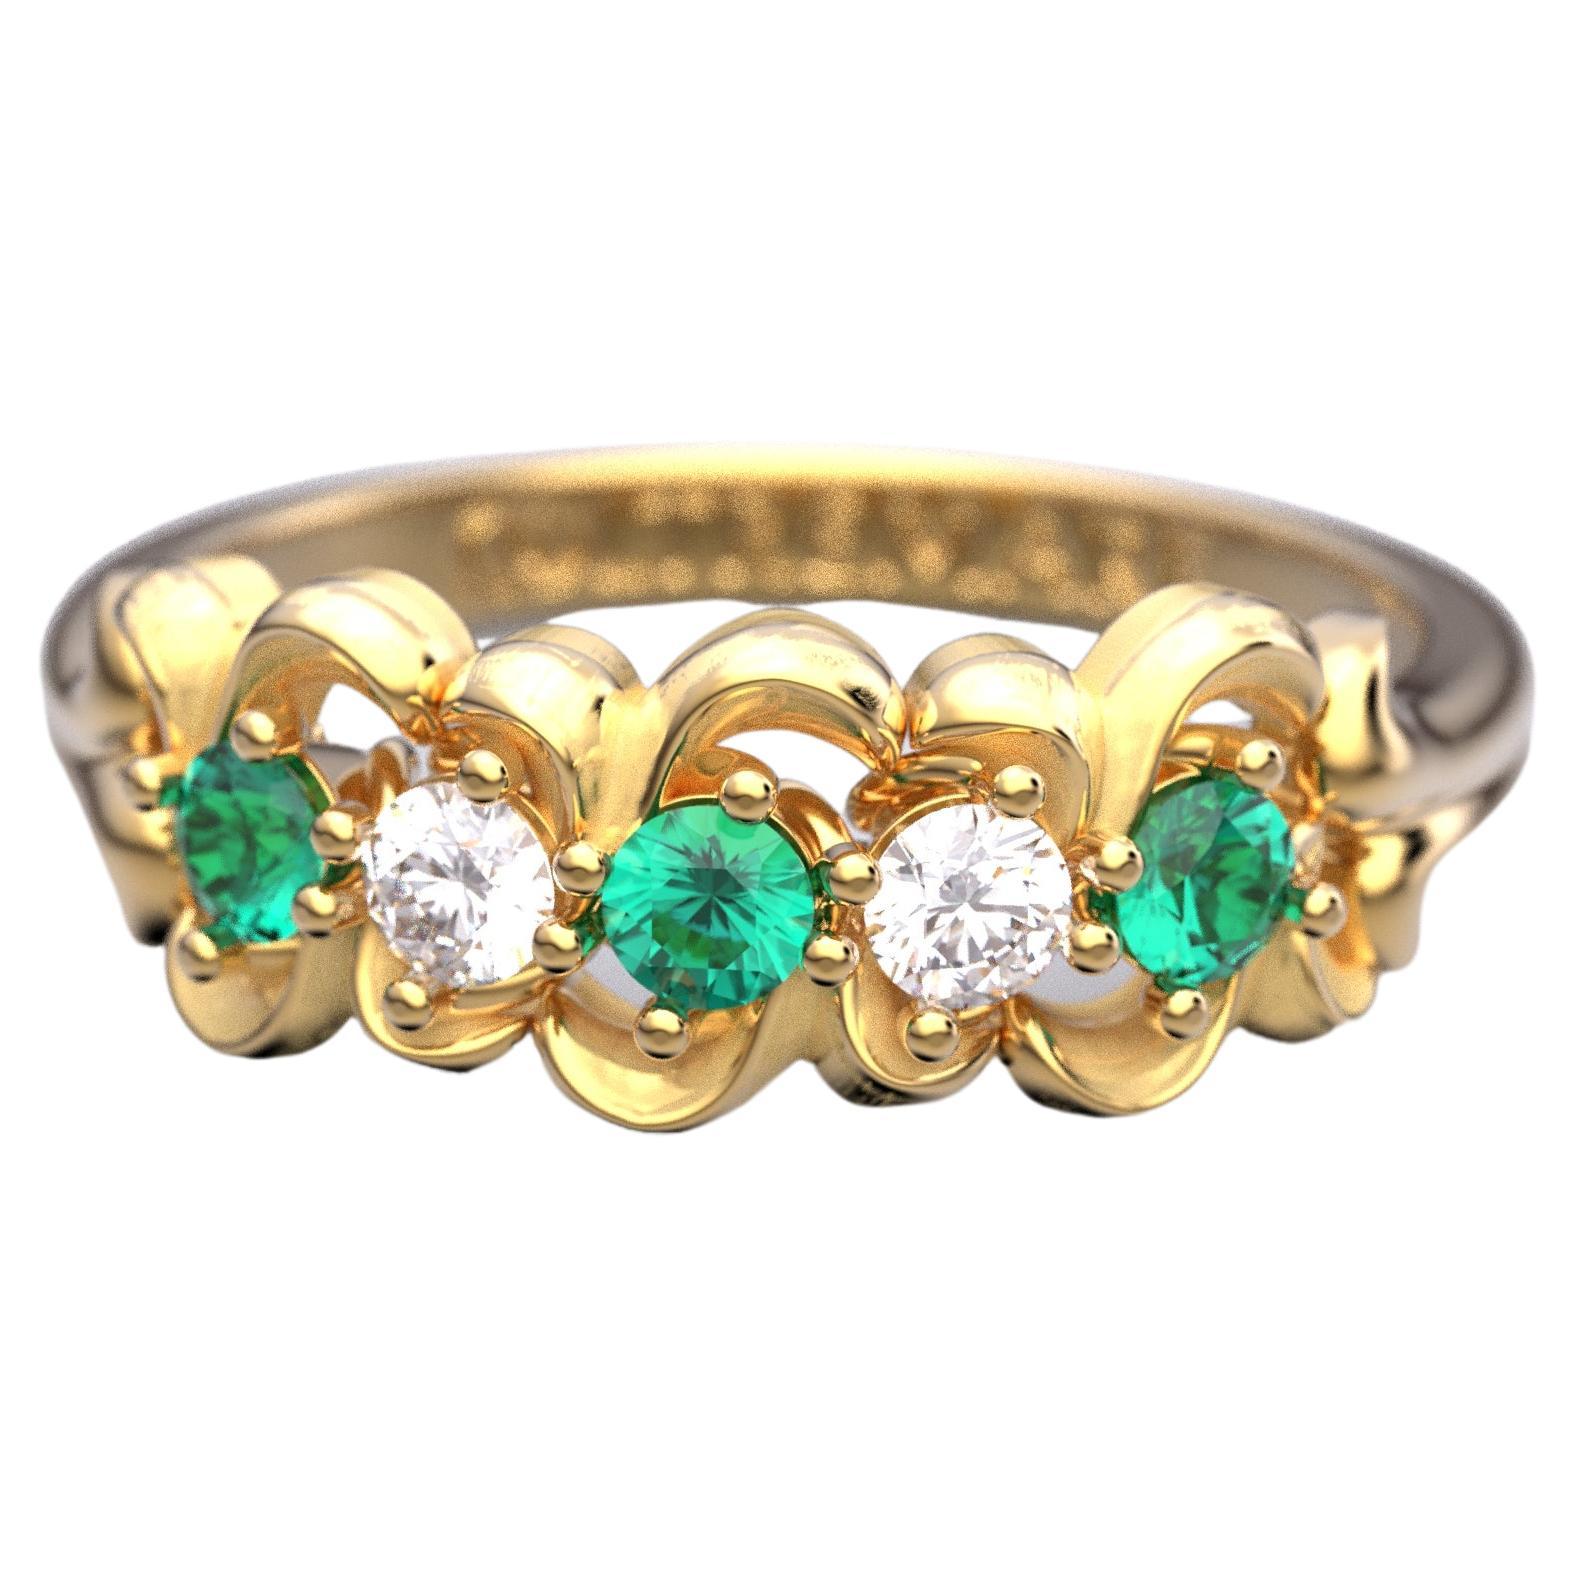 For Sale:  Emerald and Diamond Five Stone Anniversary Band Made in Italy in 18k Solid Gold